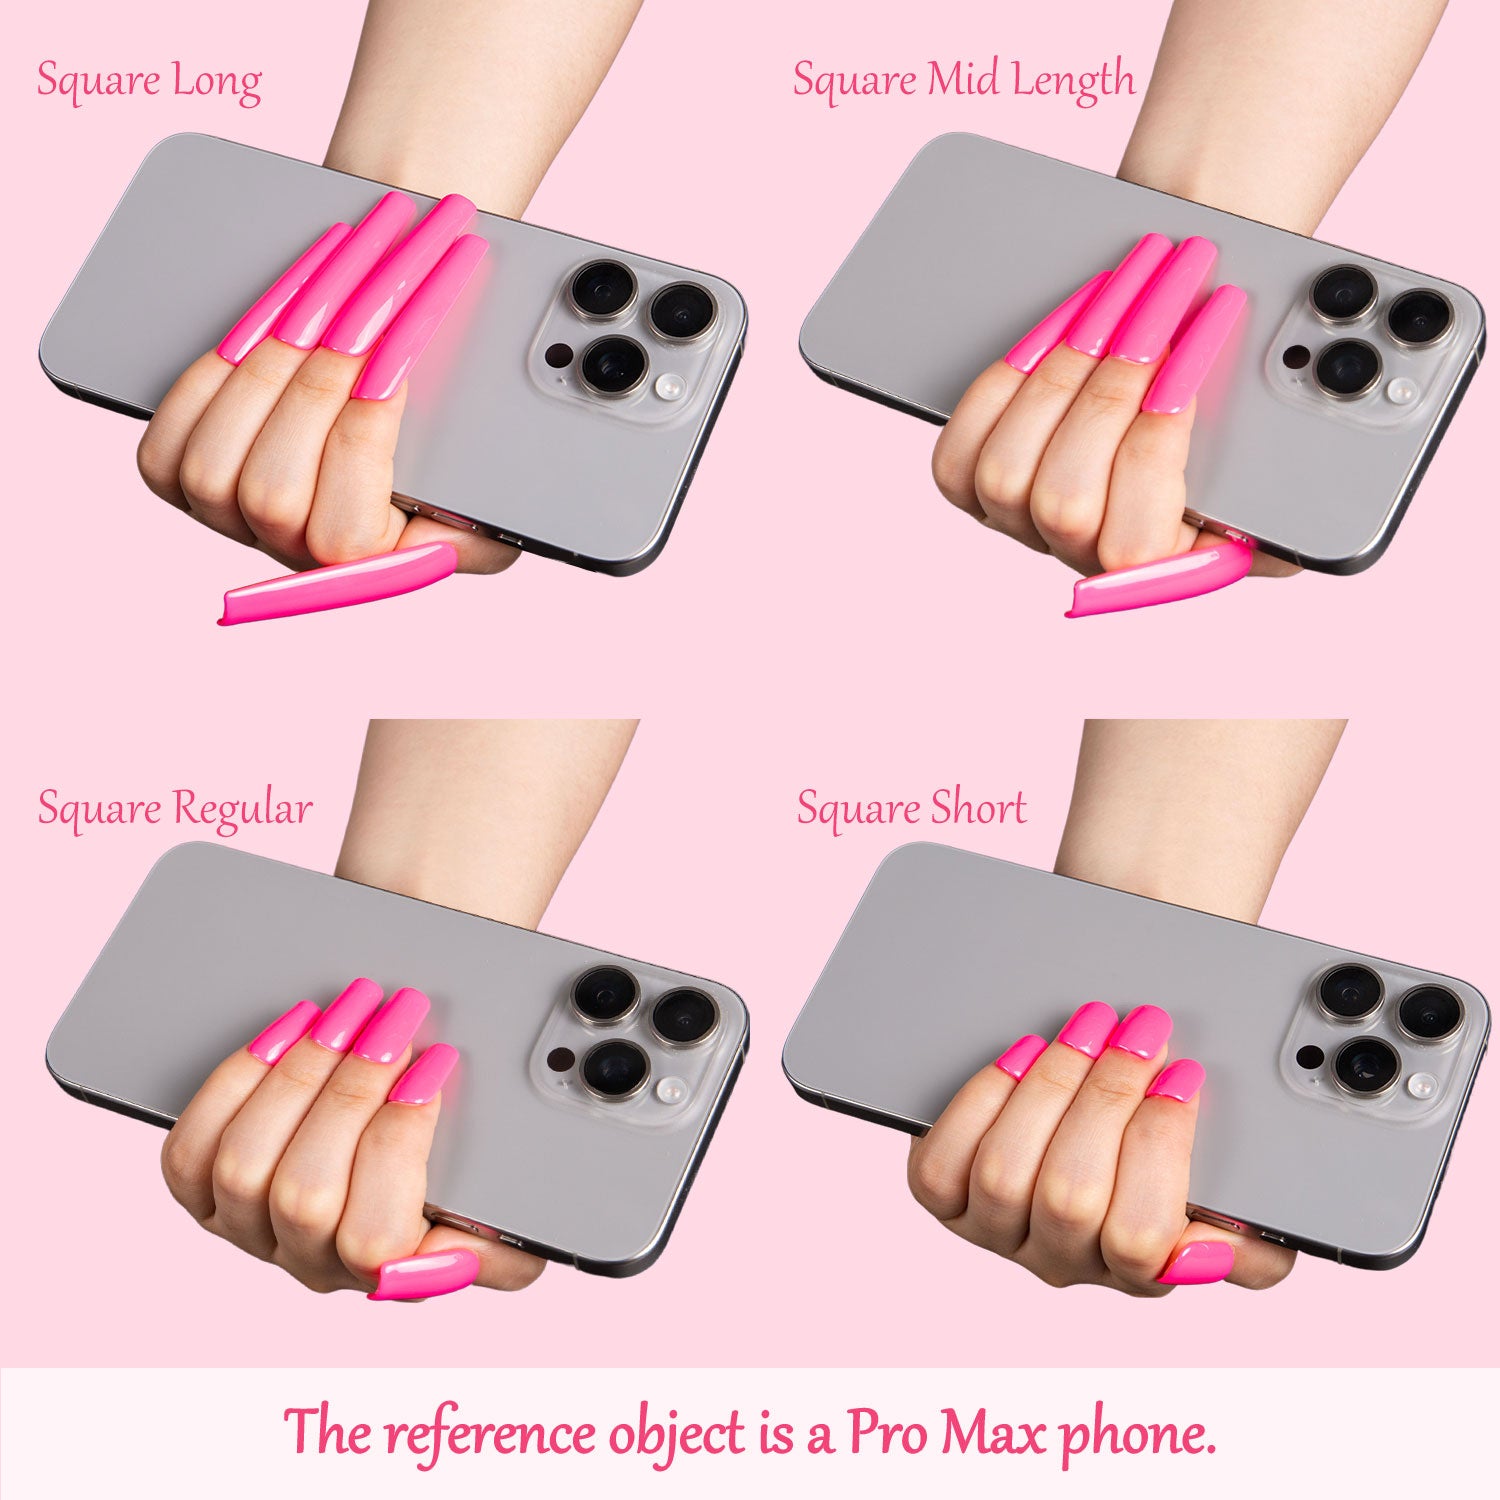 Four hands holding a Pro Max phone with bright pink square press-on nails in varying lengths: Long, Mid Length, Regular, and Short.